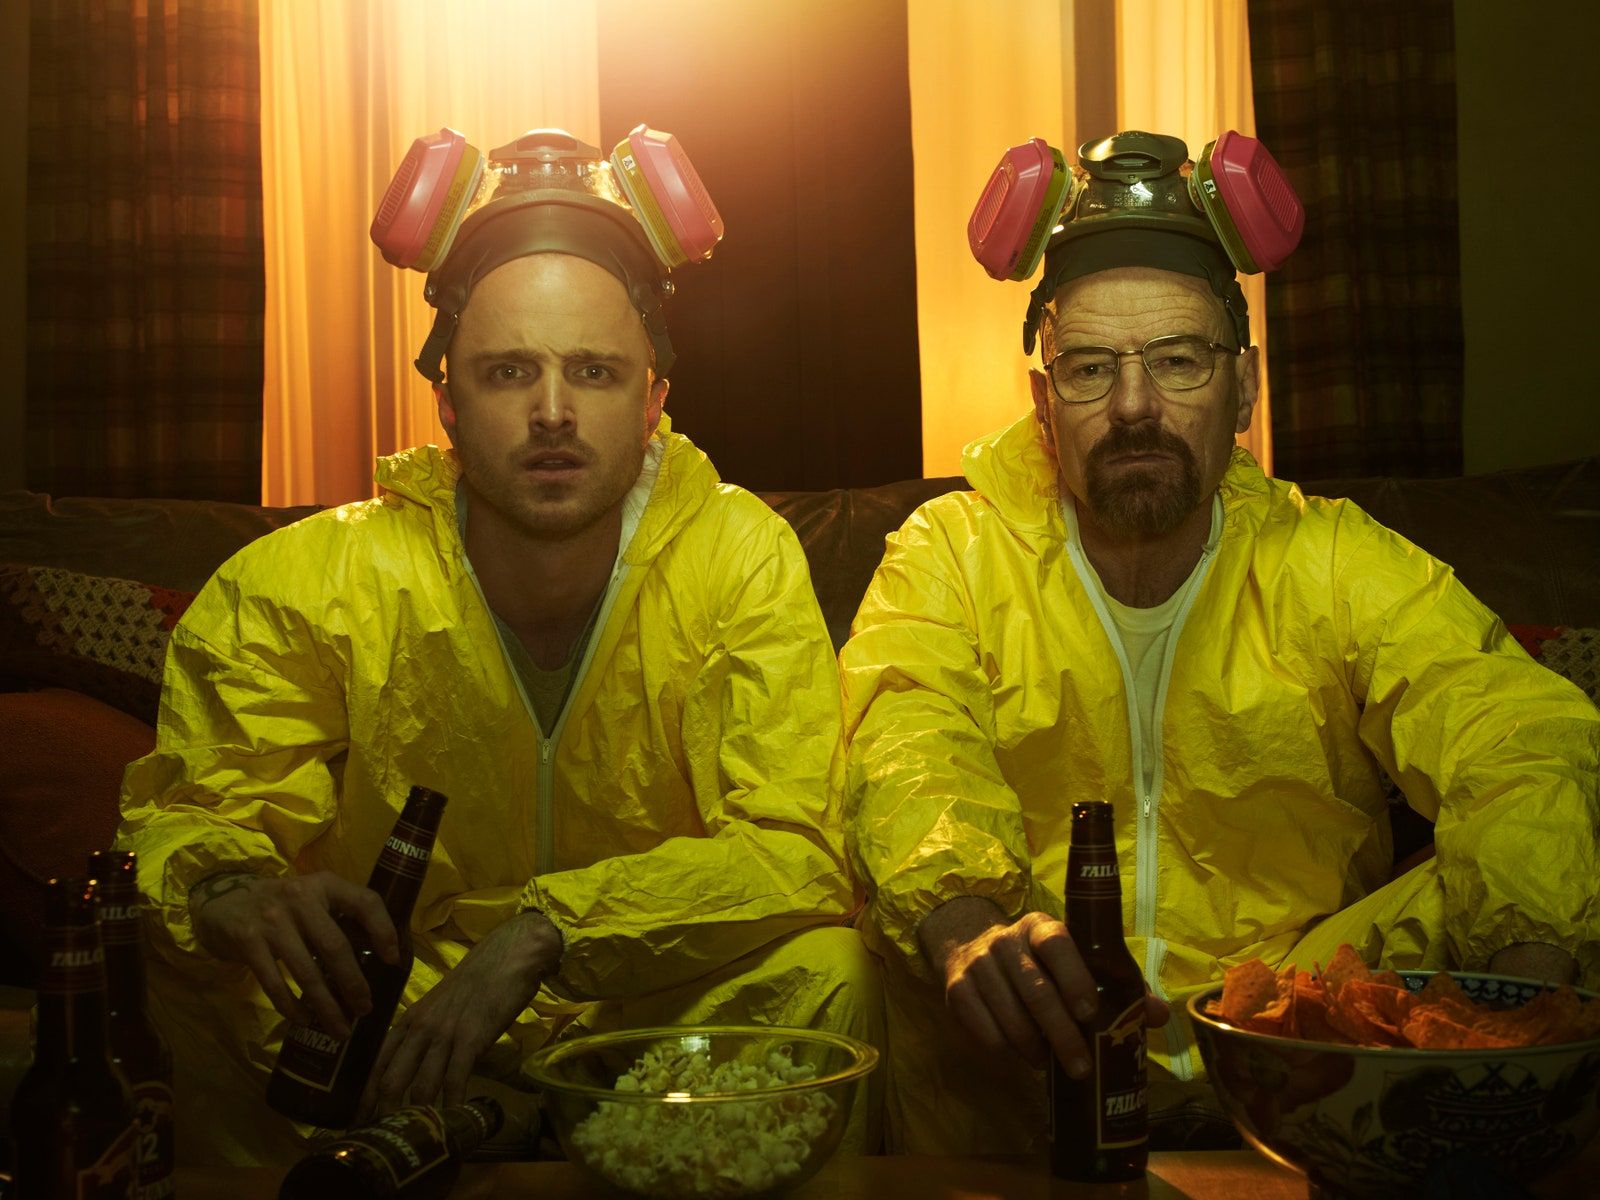 Breaking Bad Hintergrundbild 1600x1200. Perfection Will Not Be Tolerated in Official Breaking Bad Portraits